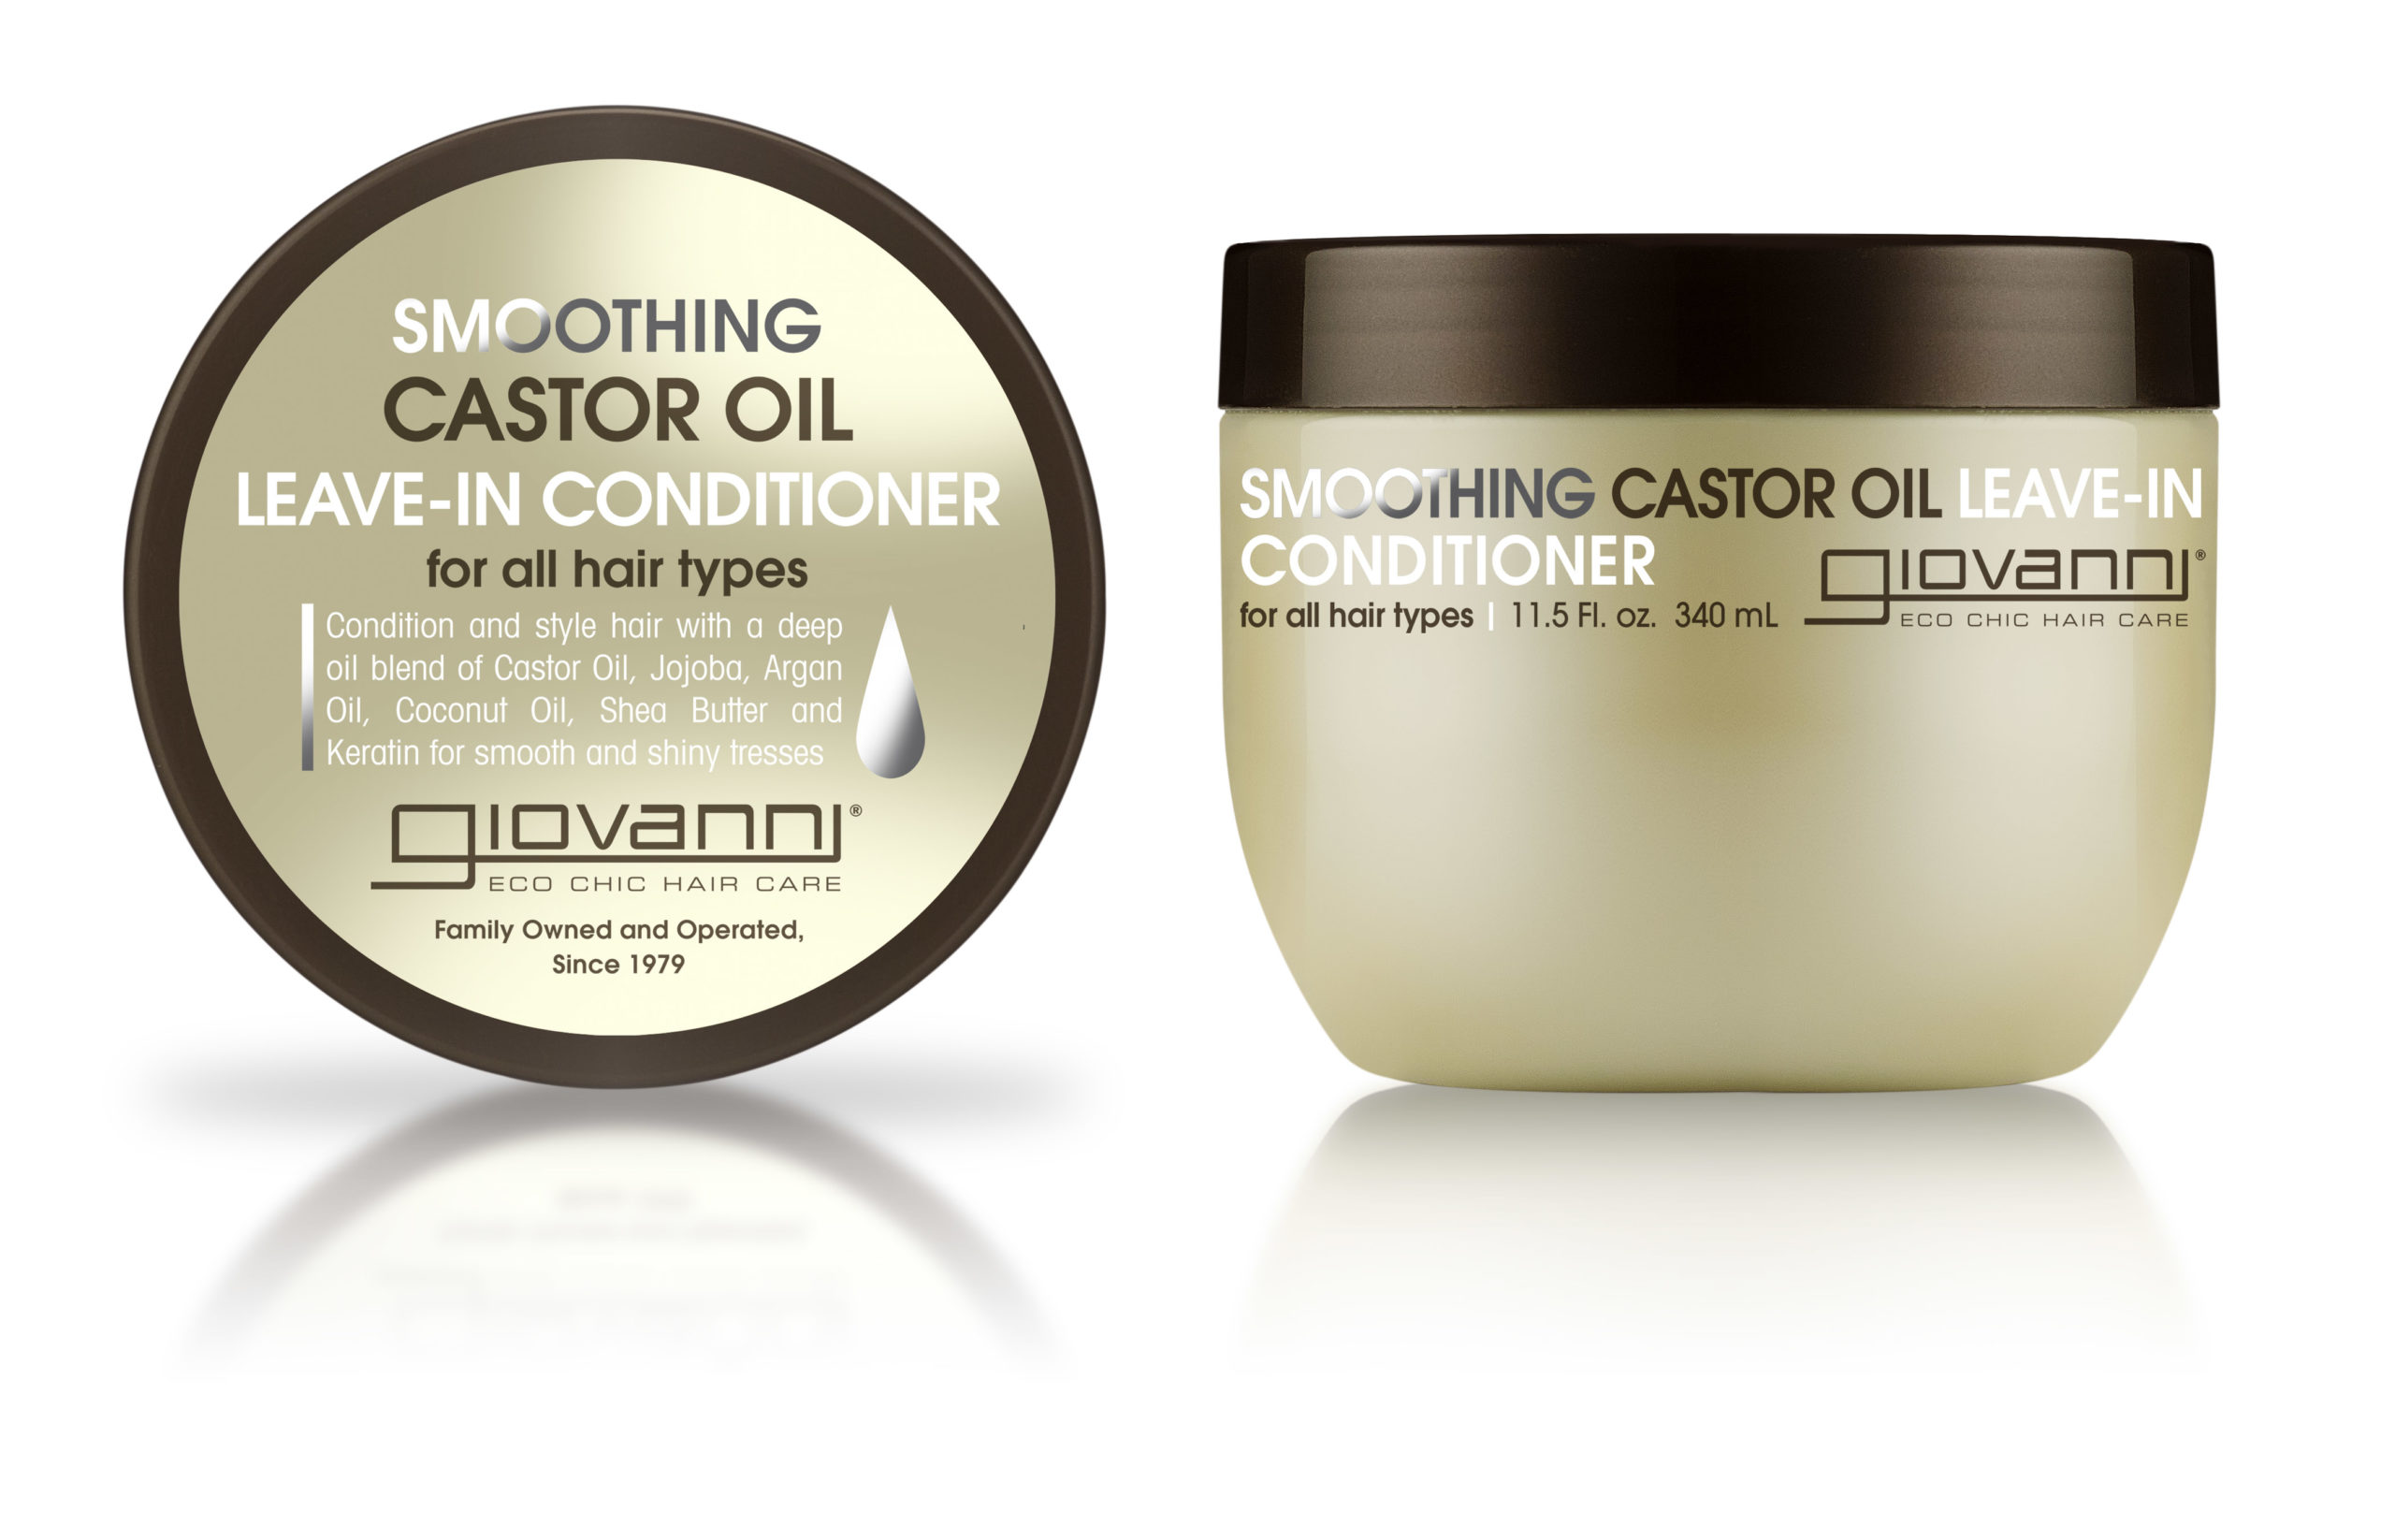 Smoothing Castor Oil Leave-In Conditioner | Giovanni